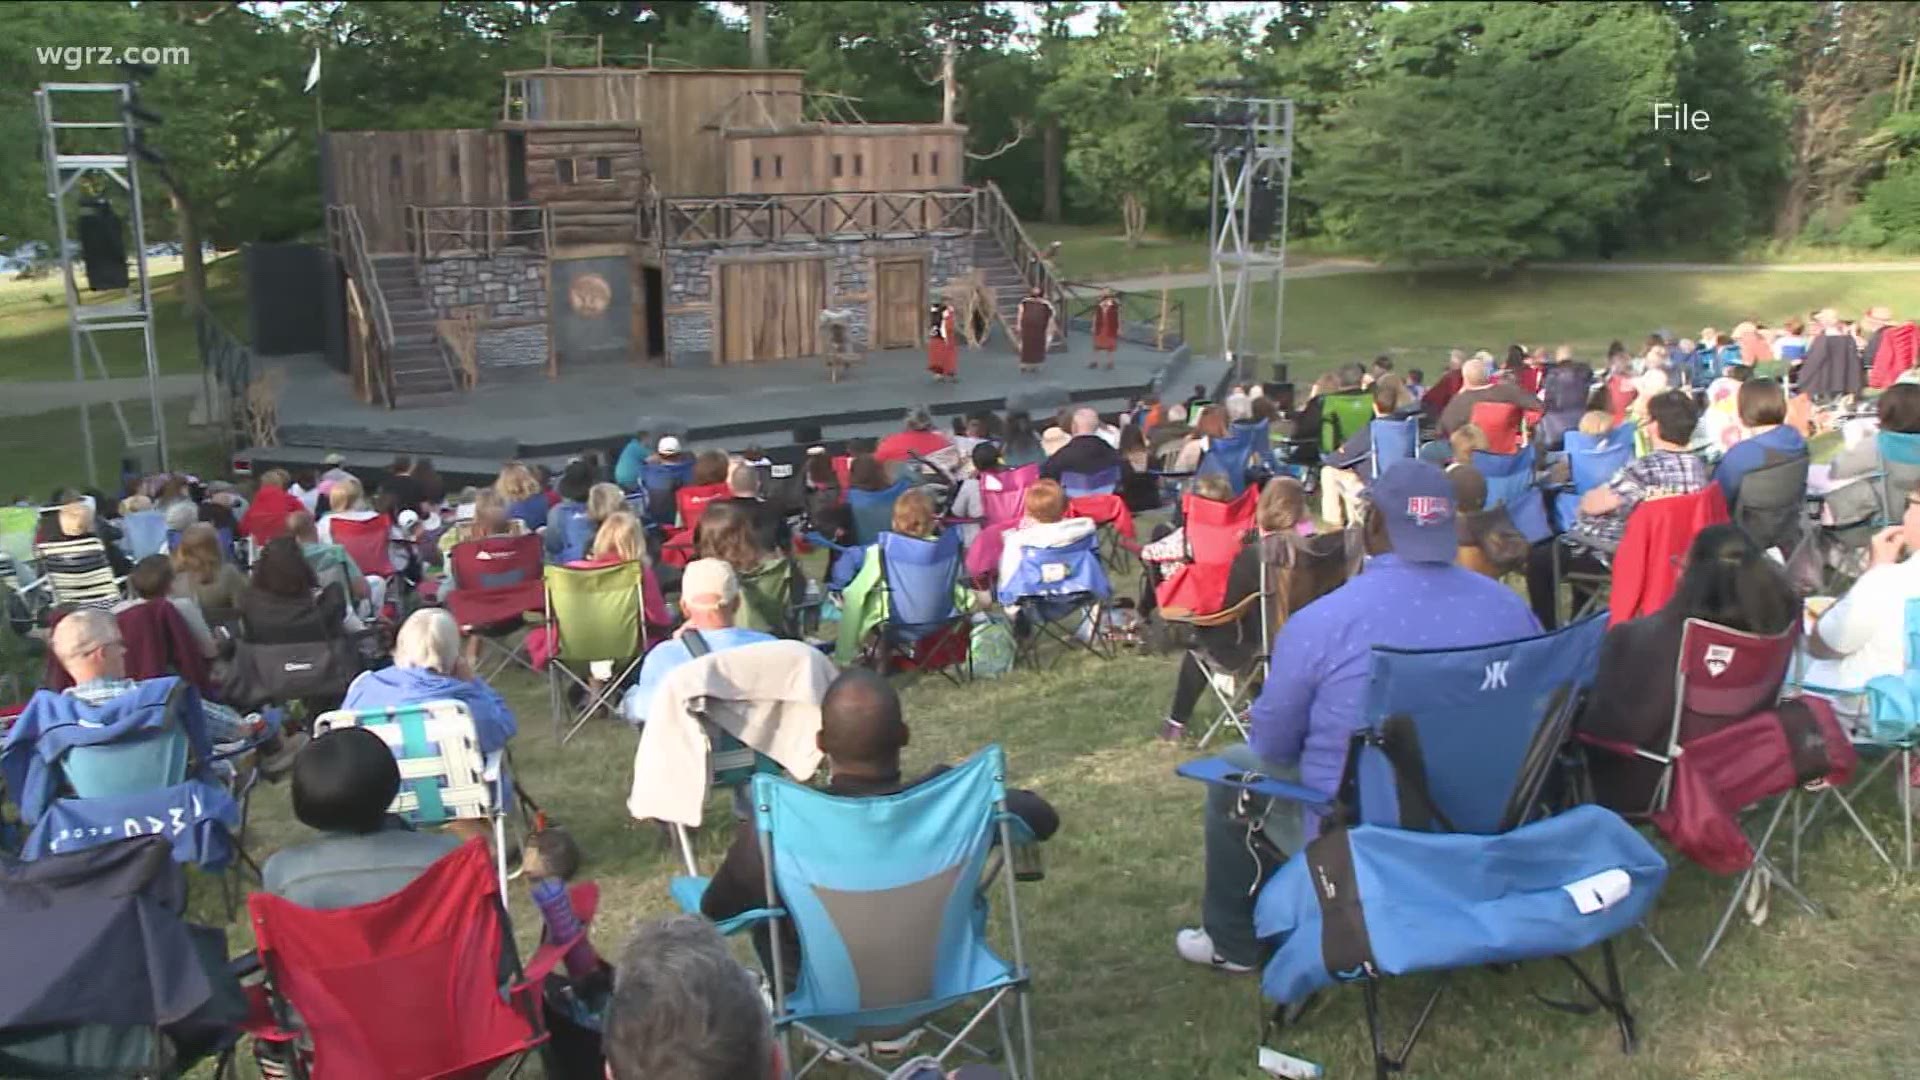 Shakespeare in the park asks for input